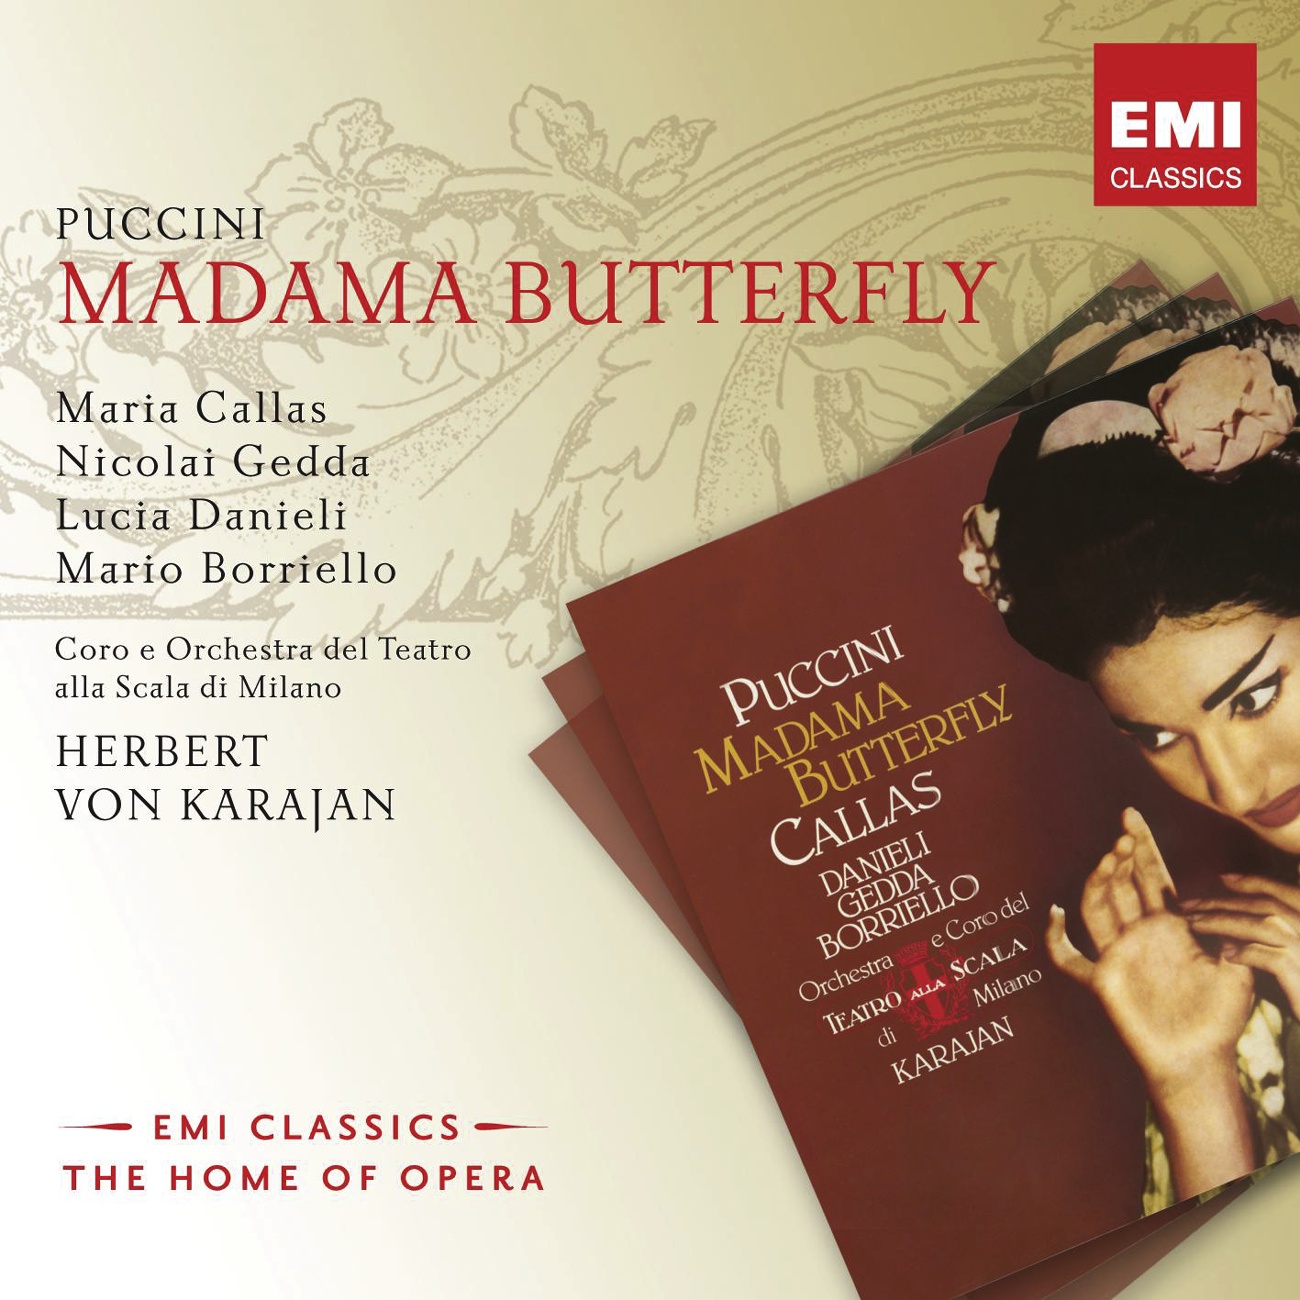 Madama Butterfly (2008 Remastered Version), Act II, First Part: Una nave da guerra